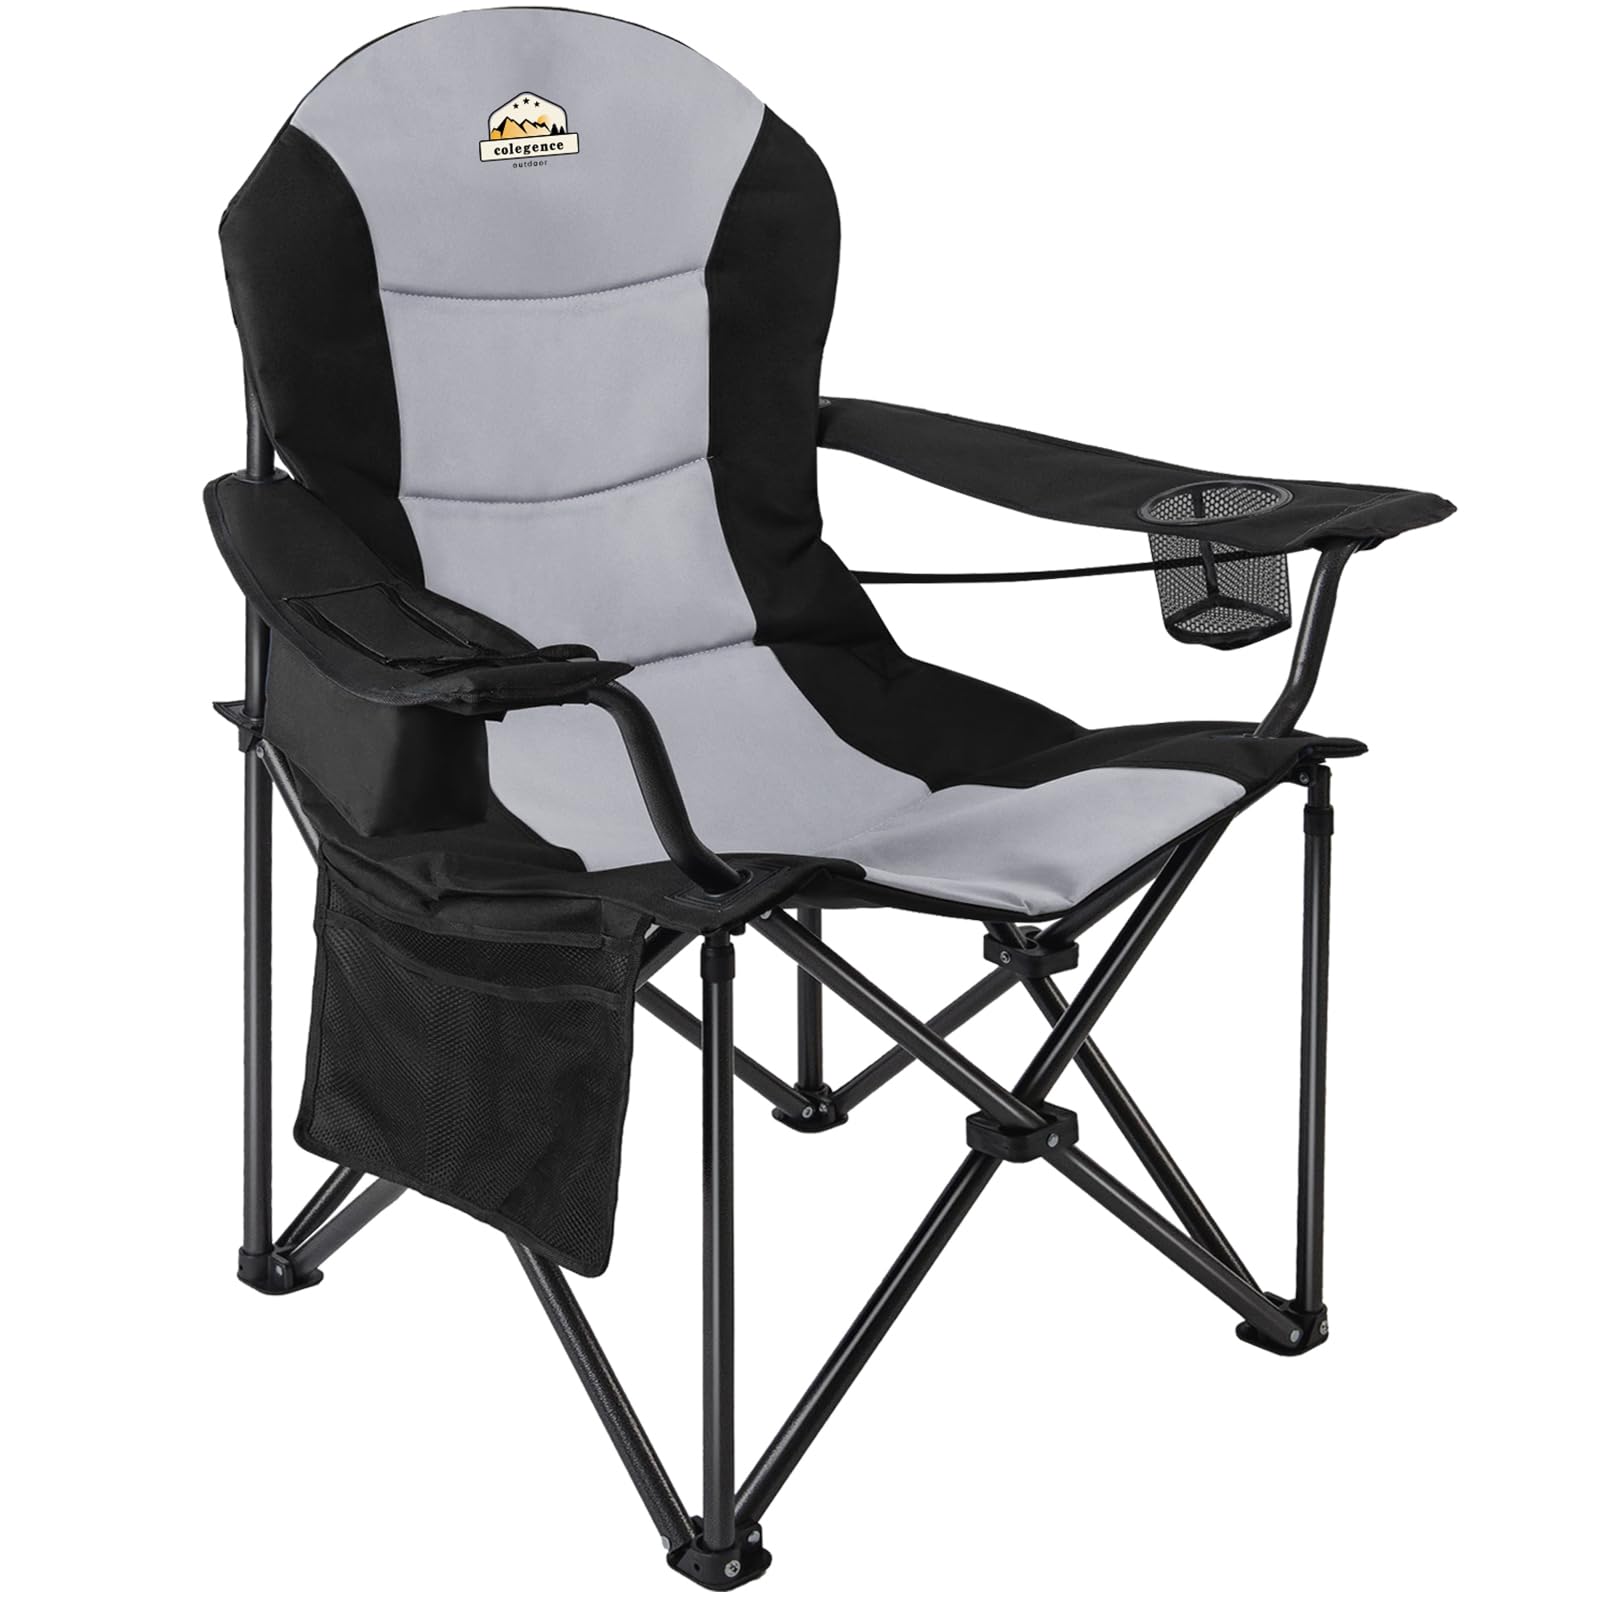 Colegence Oversized Camping Chair